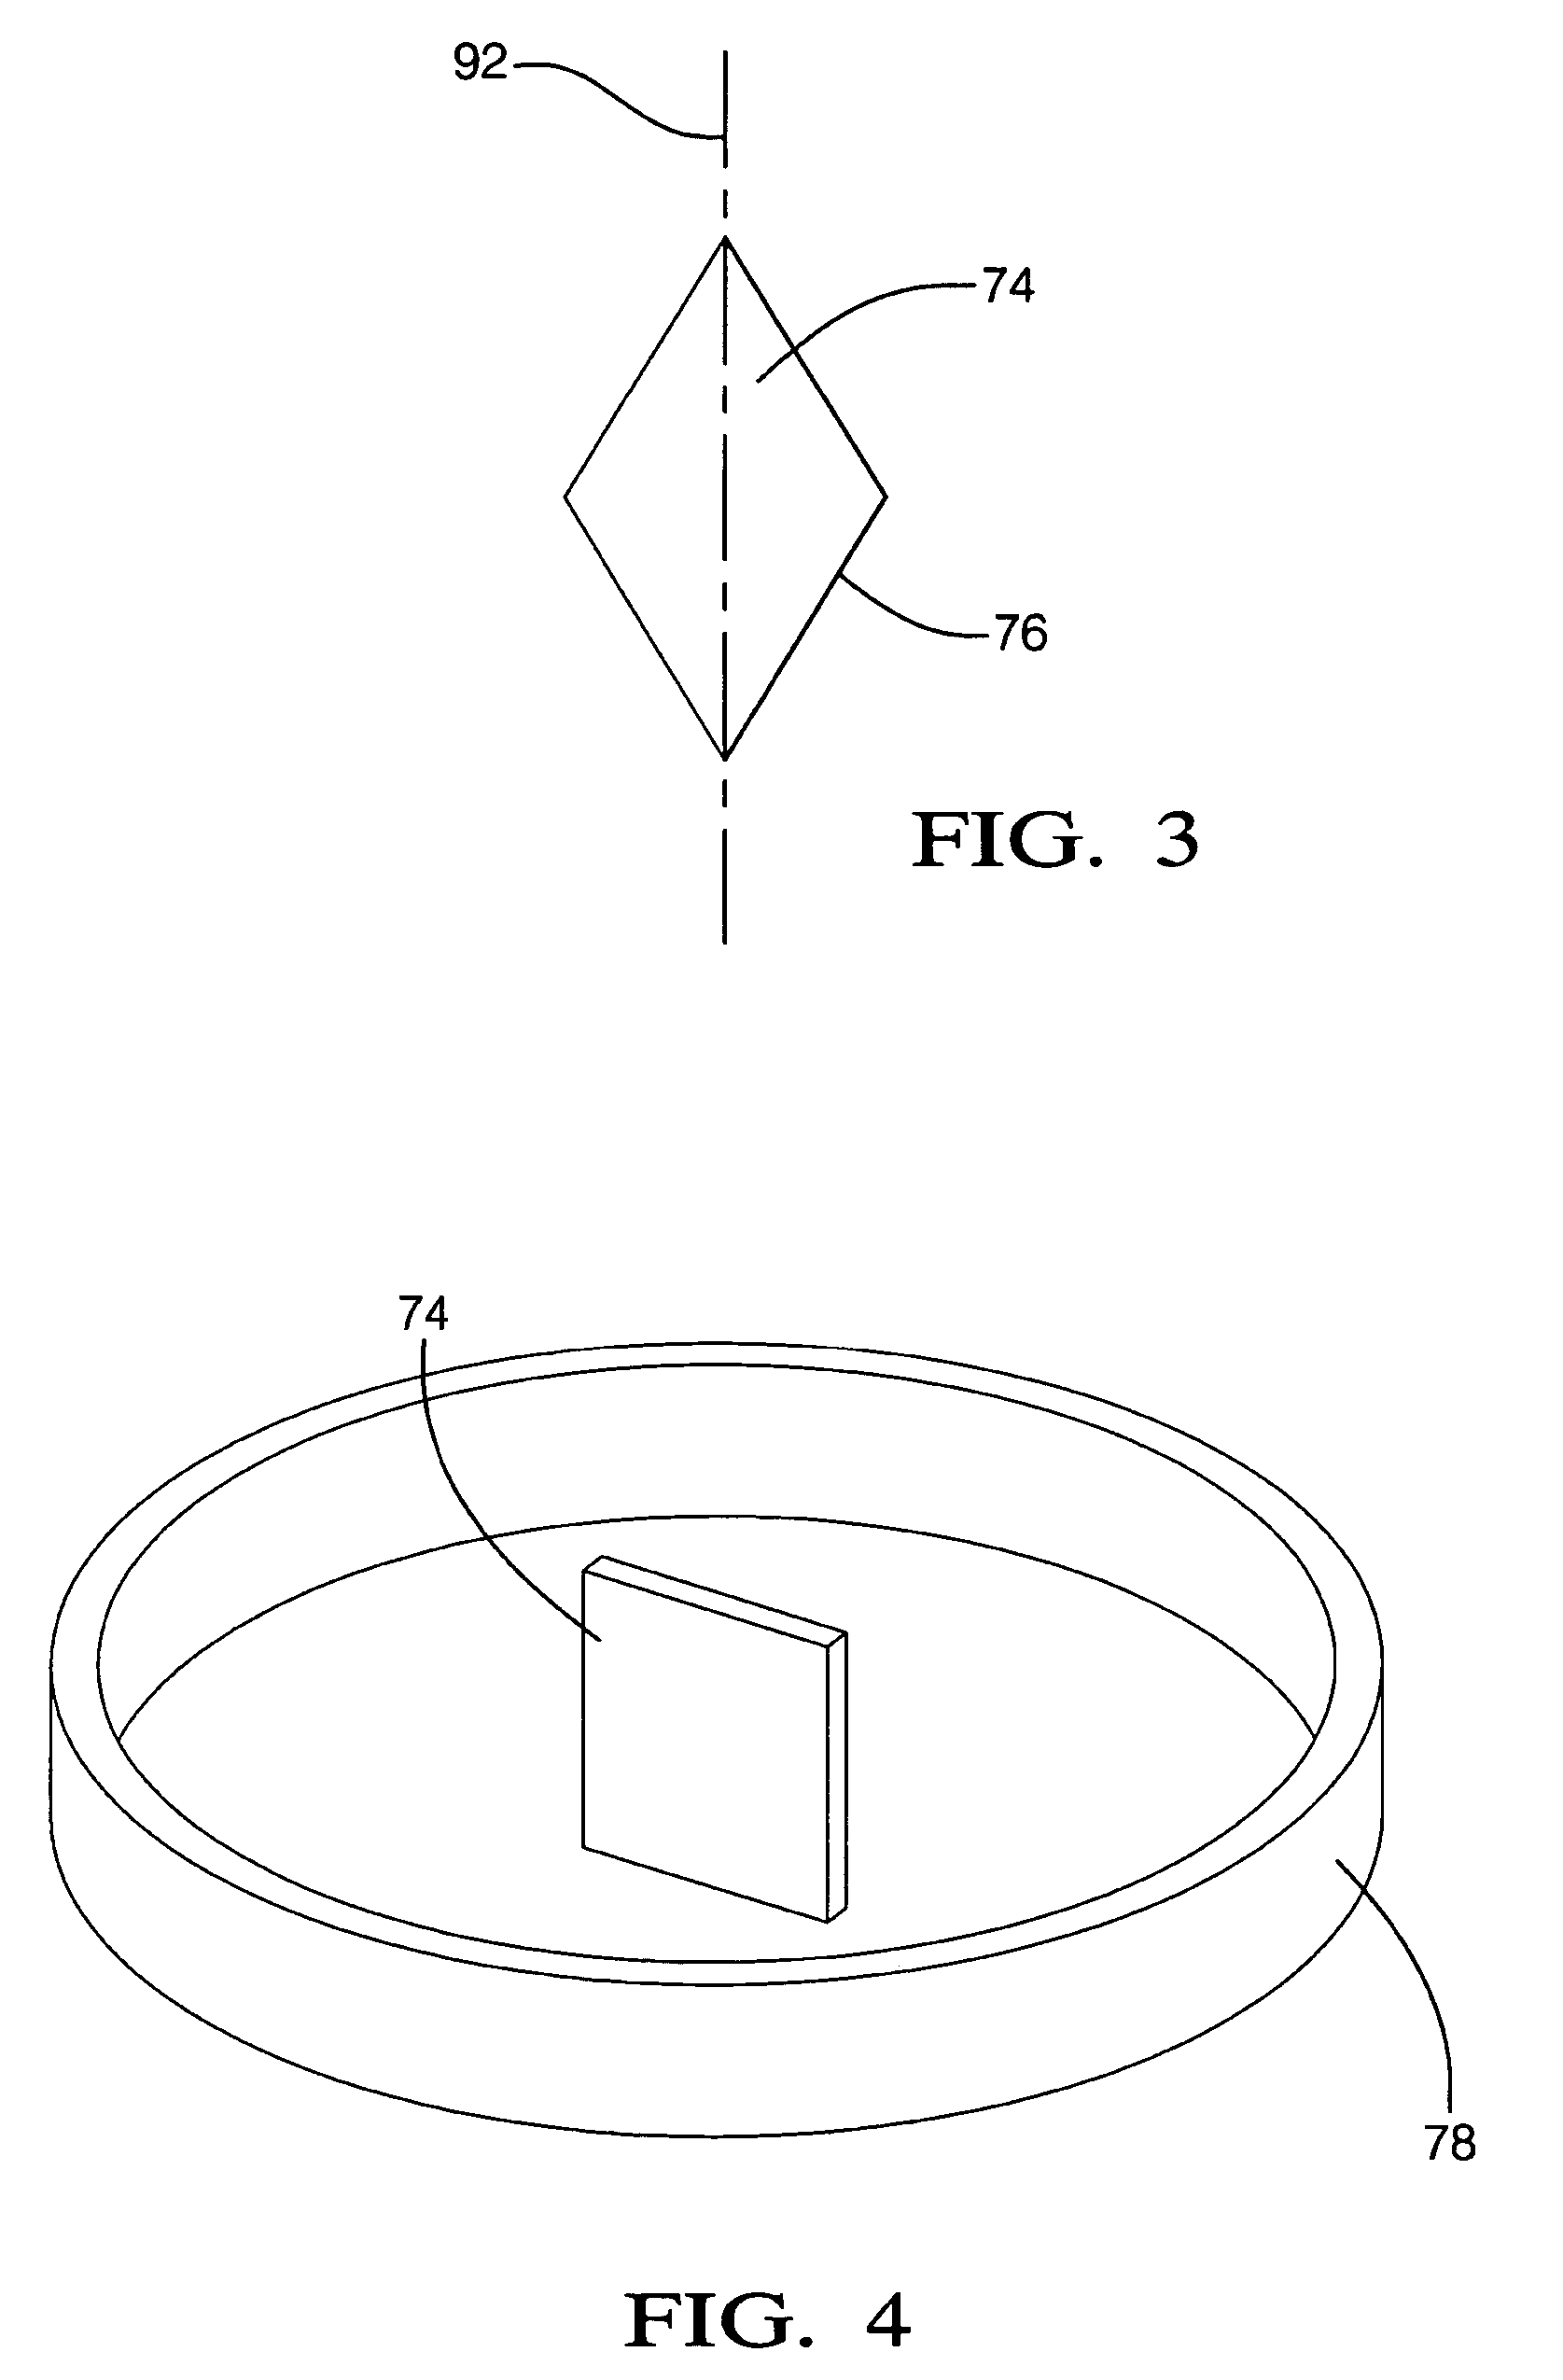 Position sensor and assembly